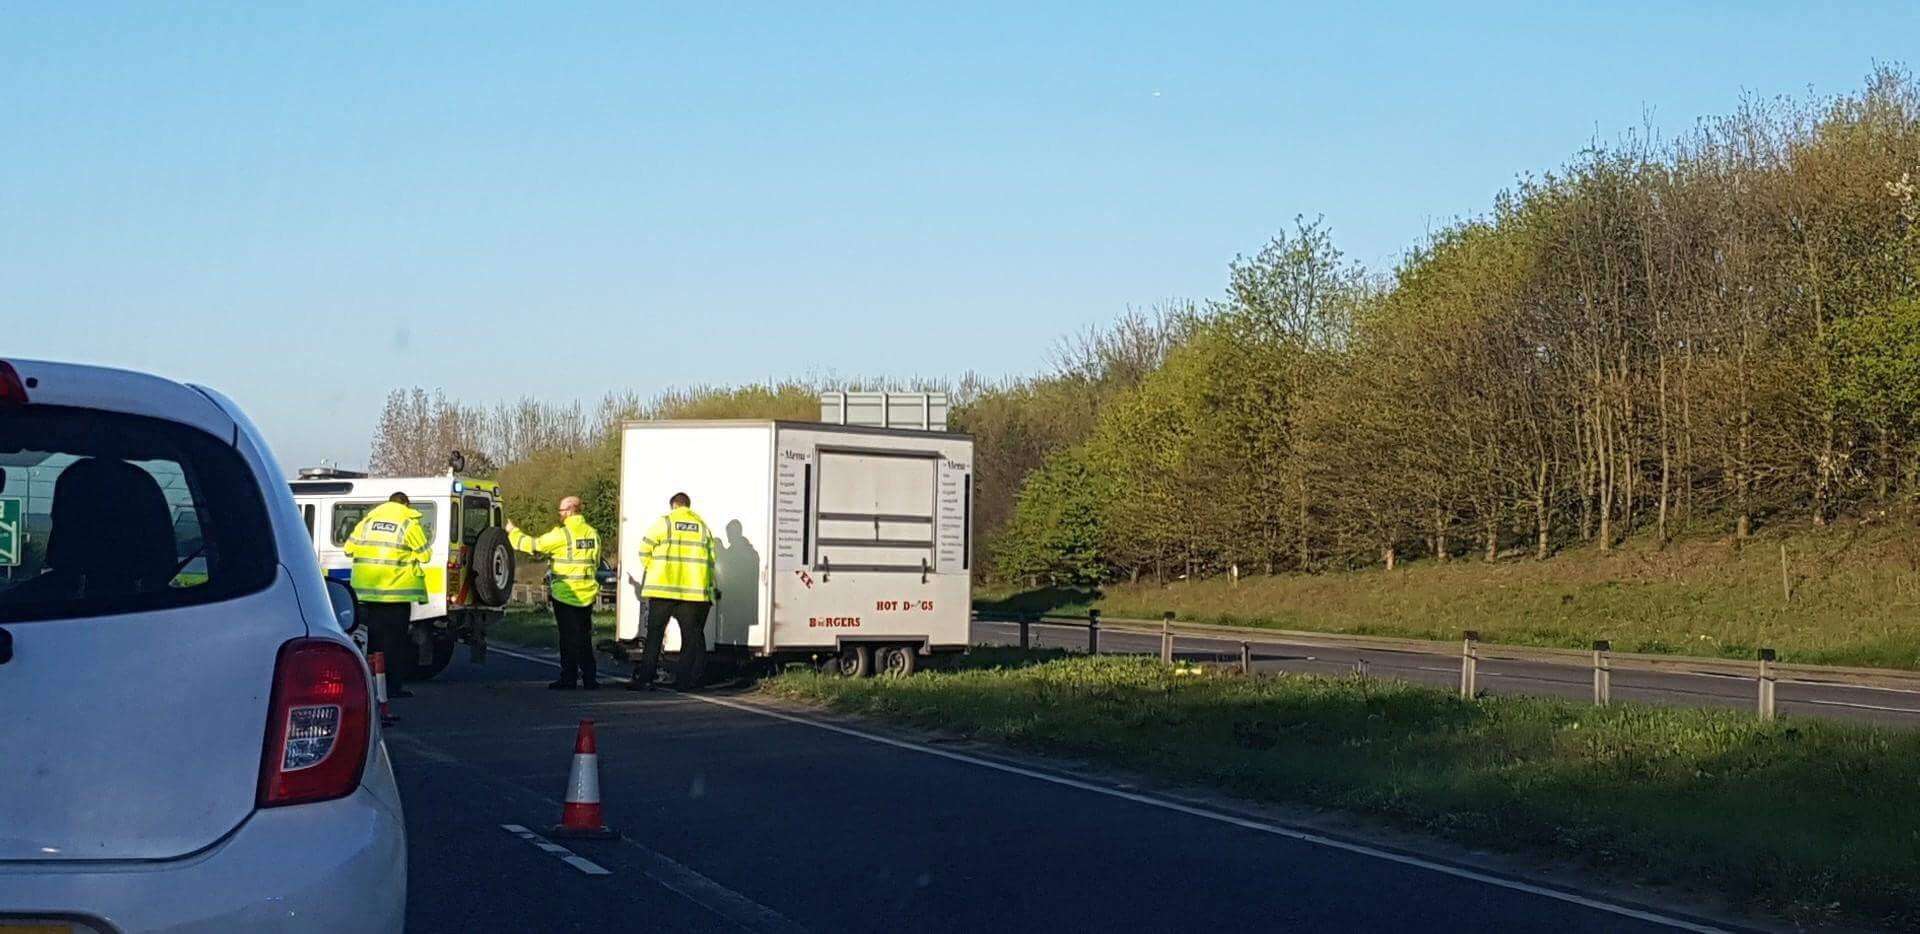 A detached burger van has caused delays on the A249